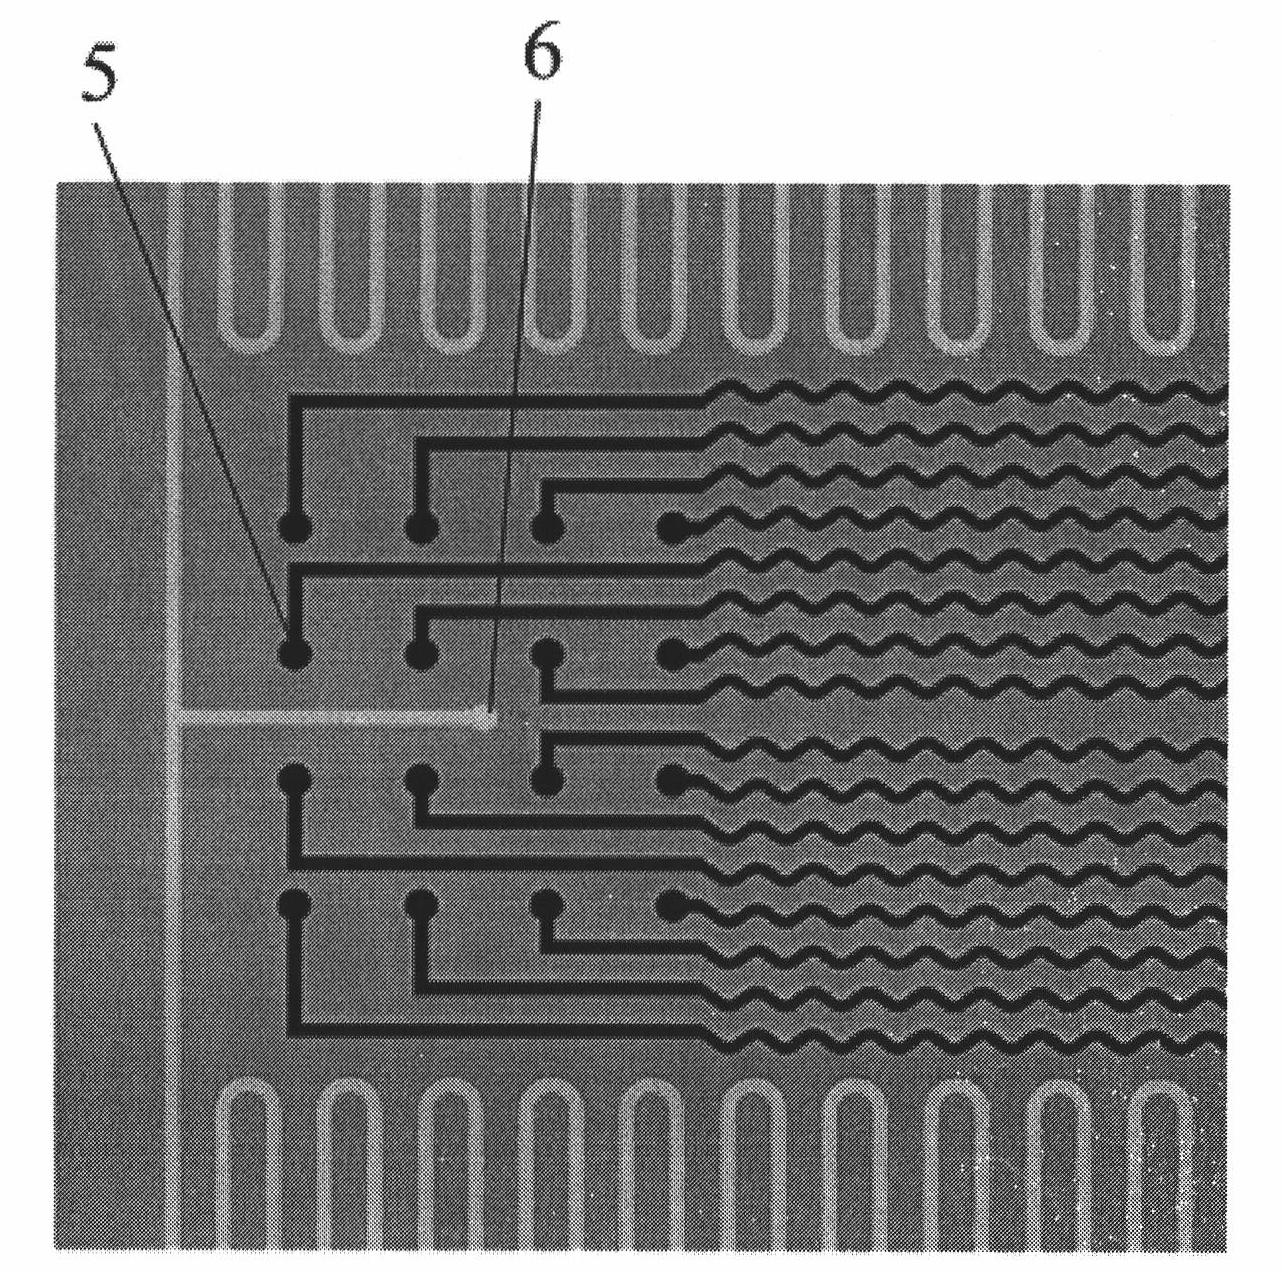 PDMS-based flexible implanted neural microelectrode and manufacturing method